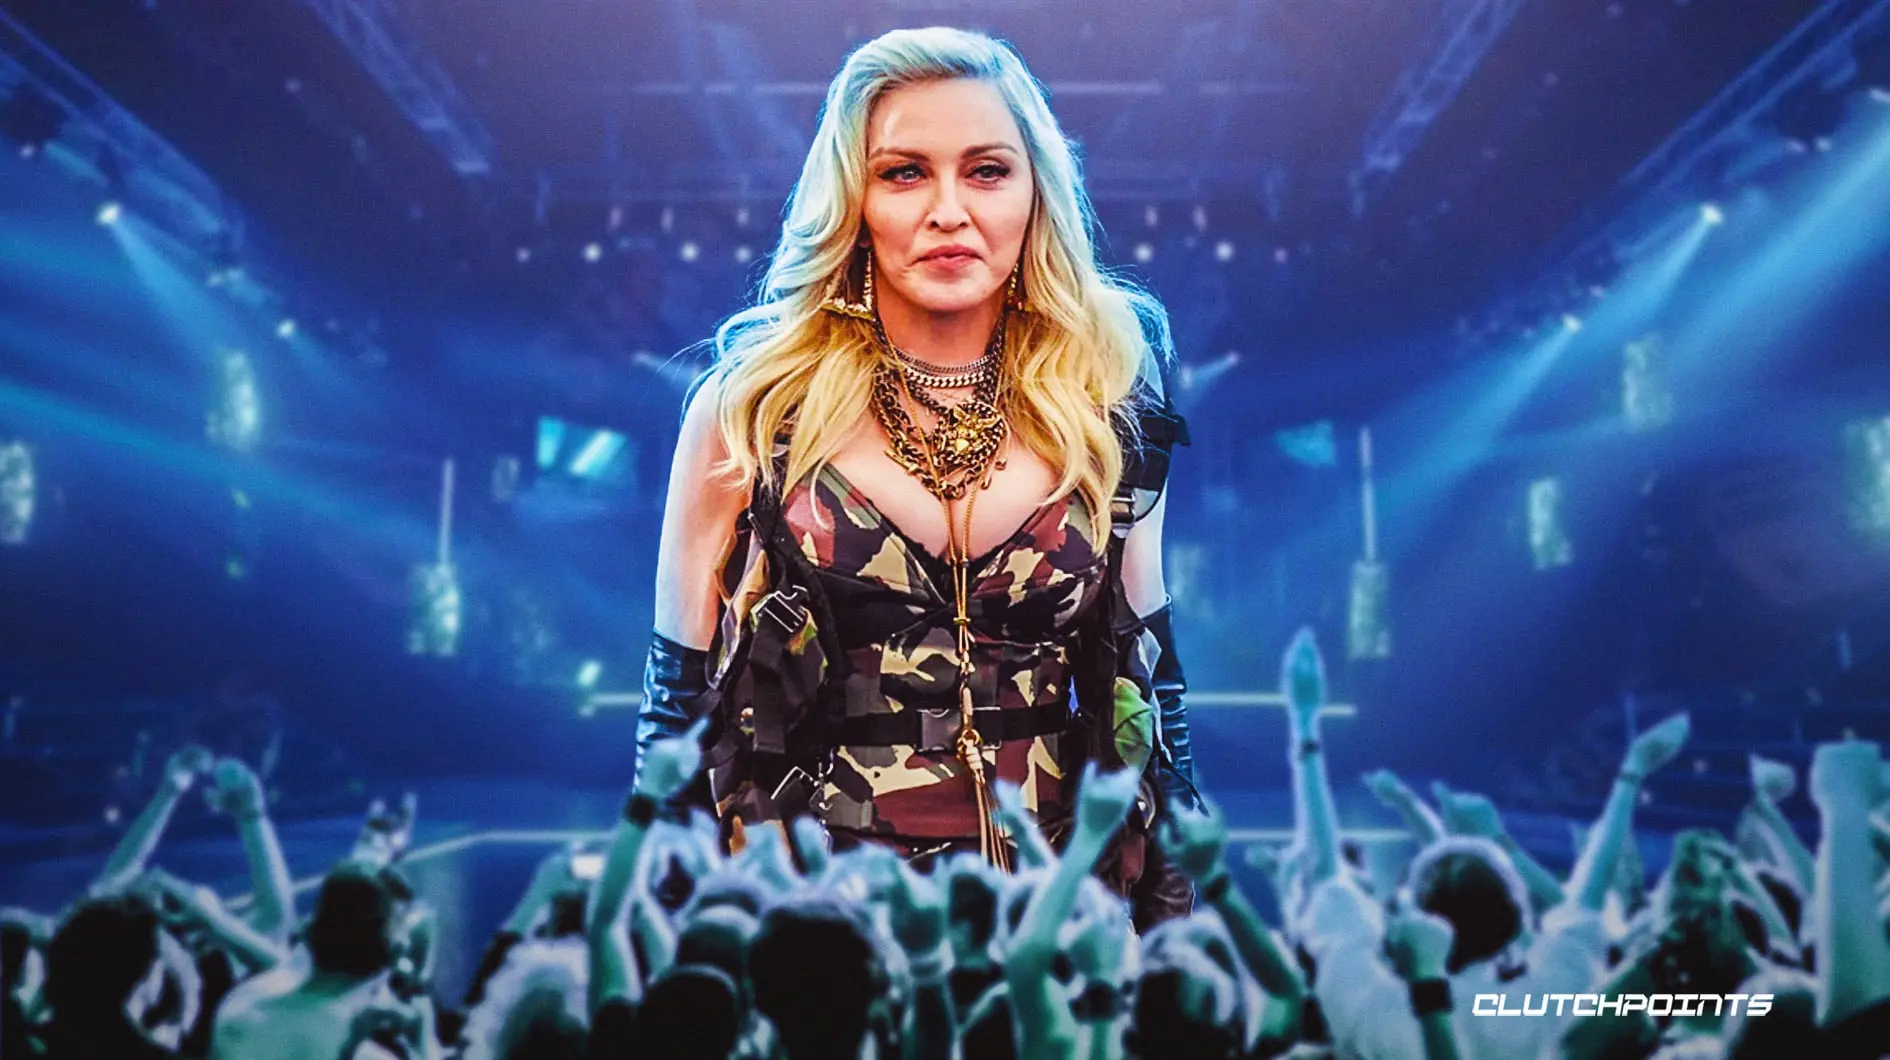 Get Ready America: Madonna is Taking the Stage!